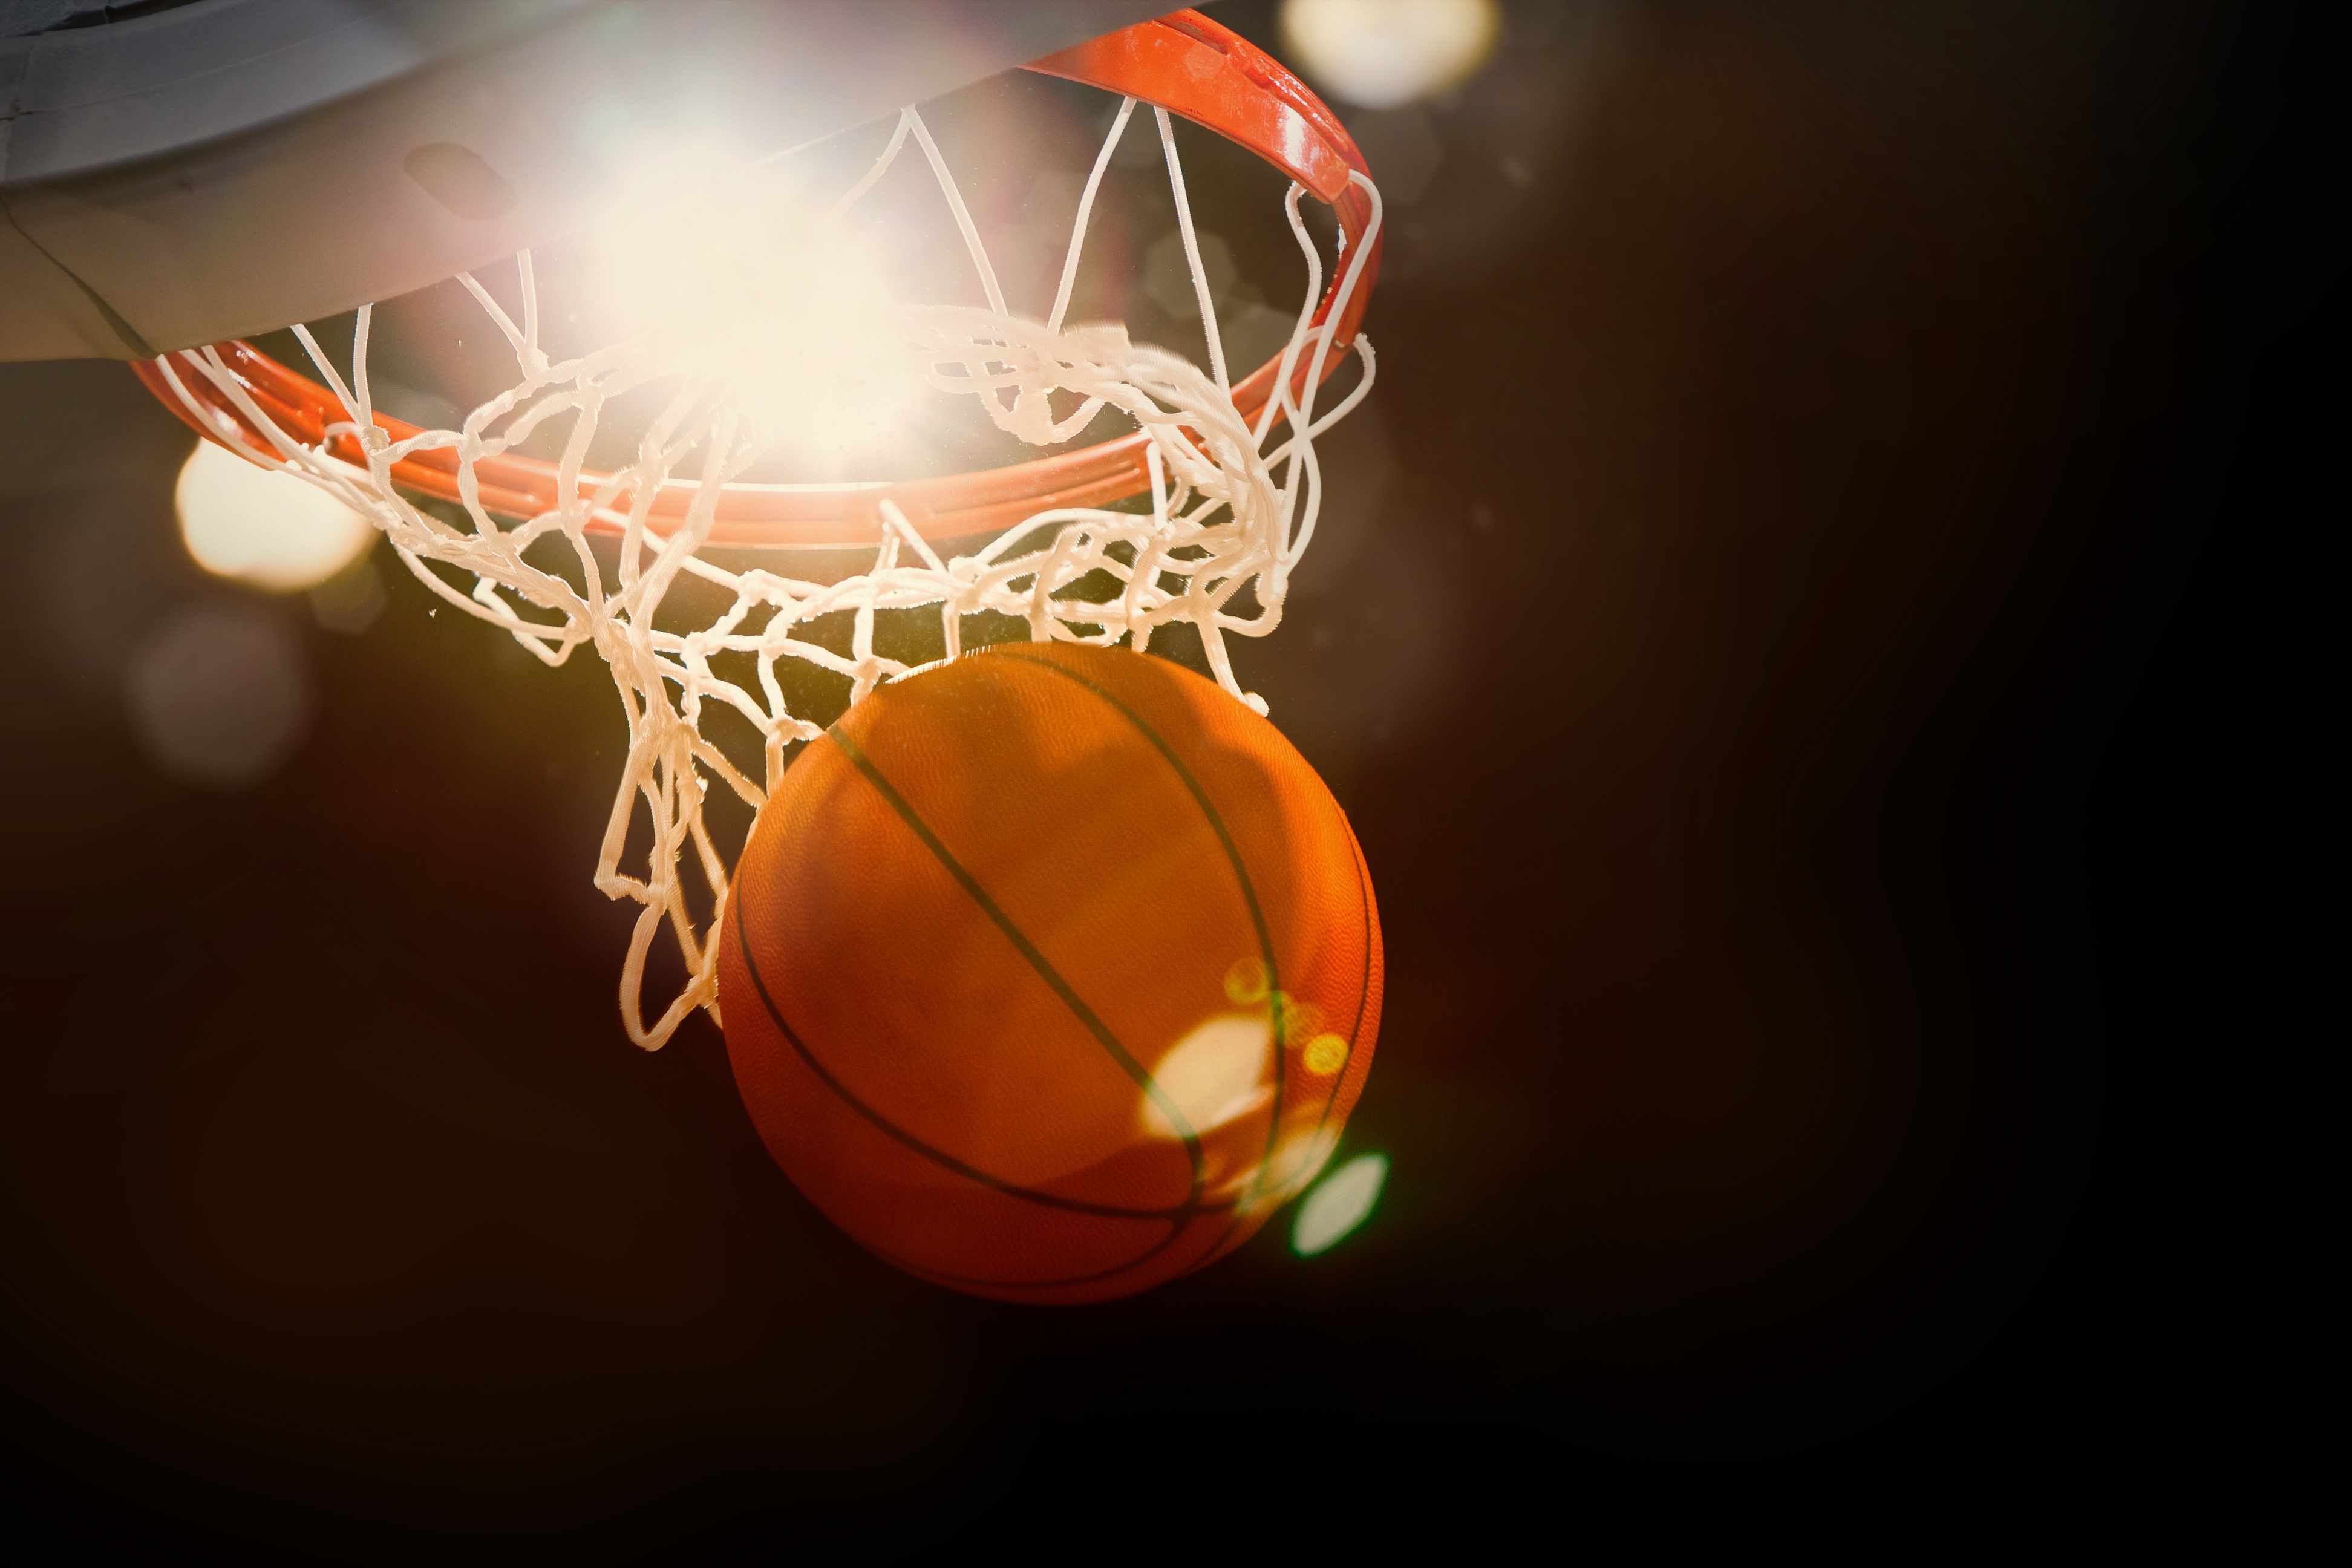 a basketball swooshing through a hoop with bright light in the background